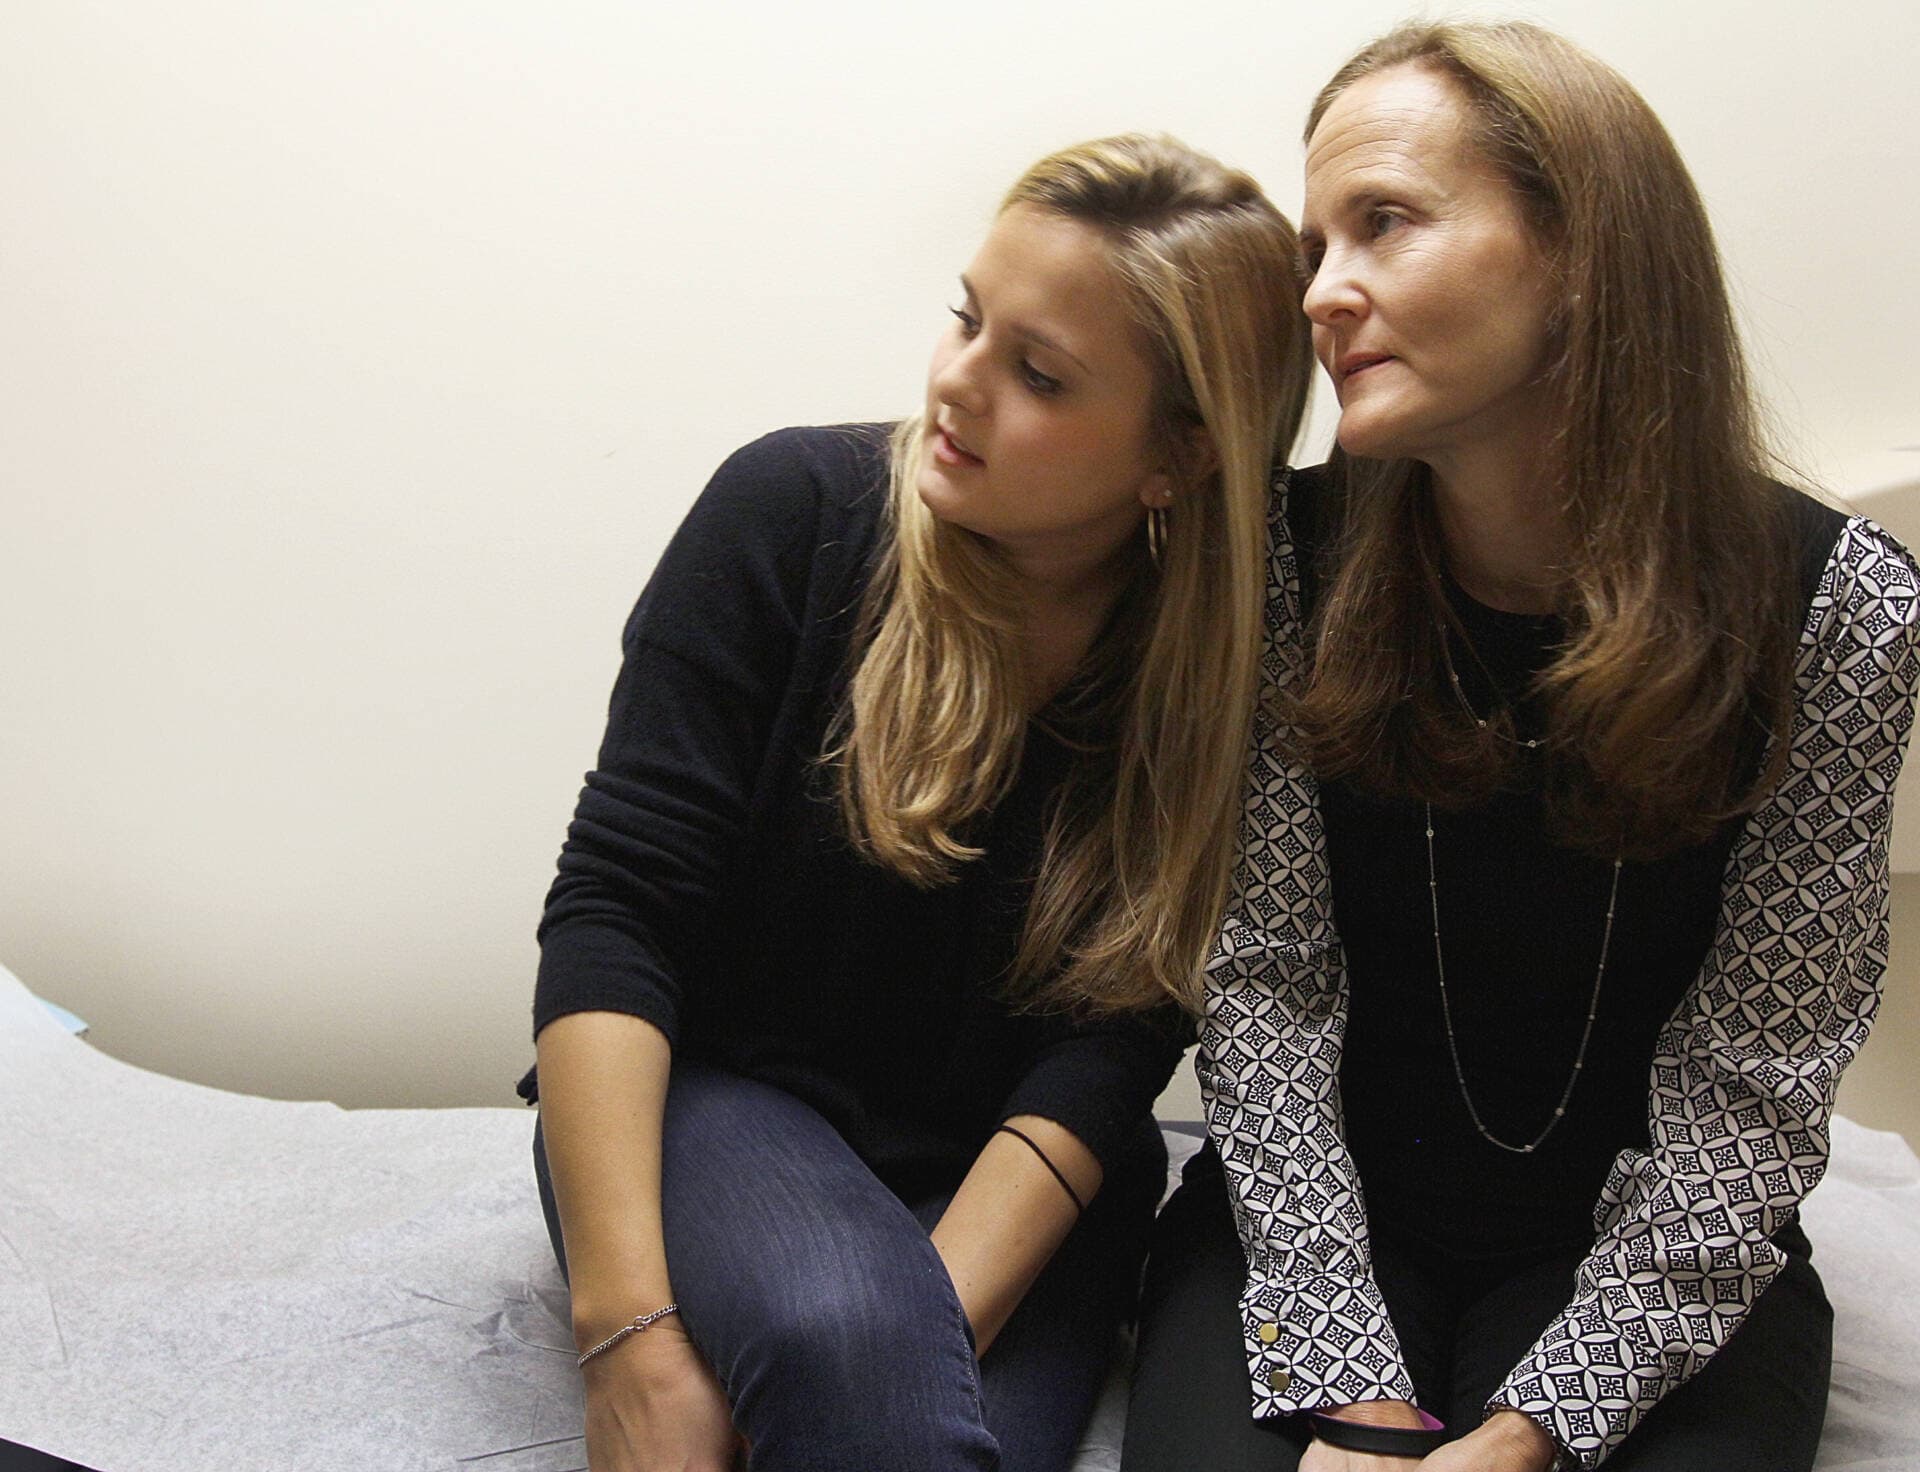 Boston Marathon bombings survivor Gillian Reny and mother Audrey Epstein Reny had a quiet moment during an appointment at Brigham and Women's Hospital in Boston, Tuesday, February 18, 2014. (Wendy Maeda/The Boston Globe via Getty Images)